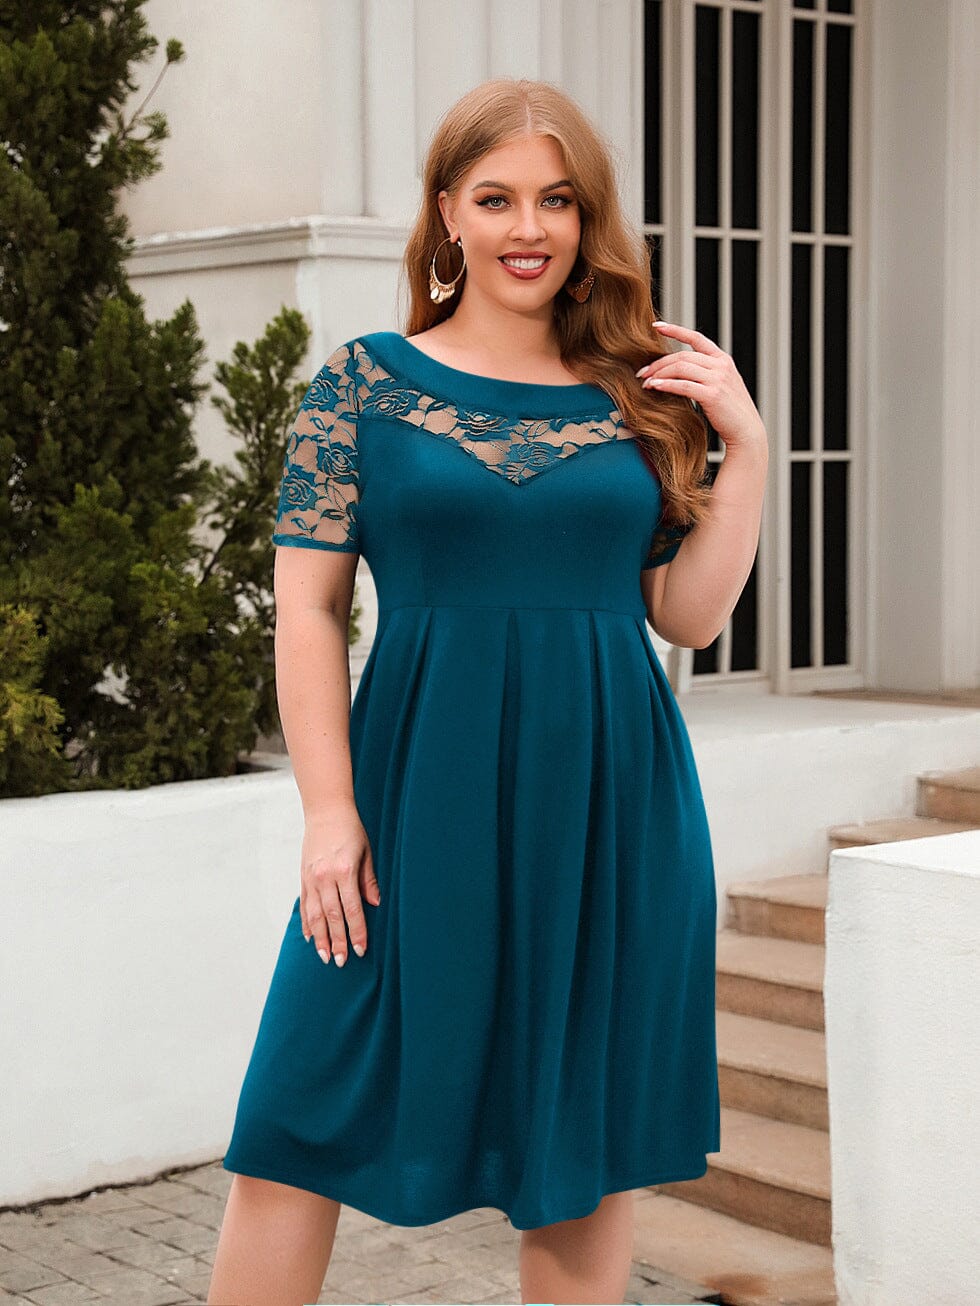 Share 201+ plus size casual dresses